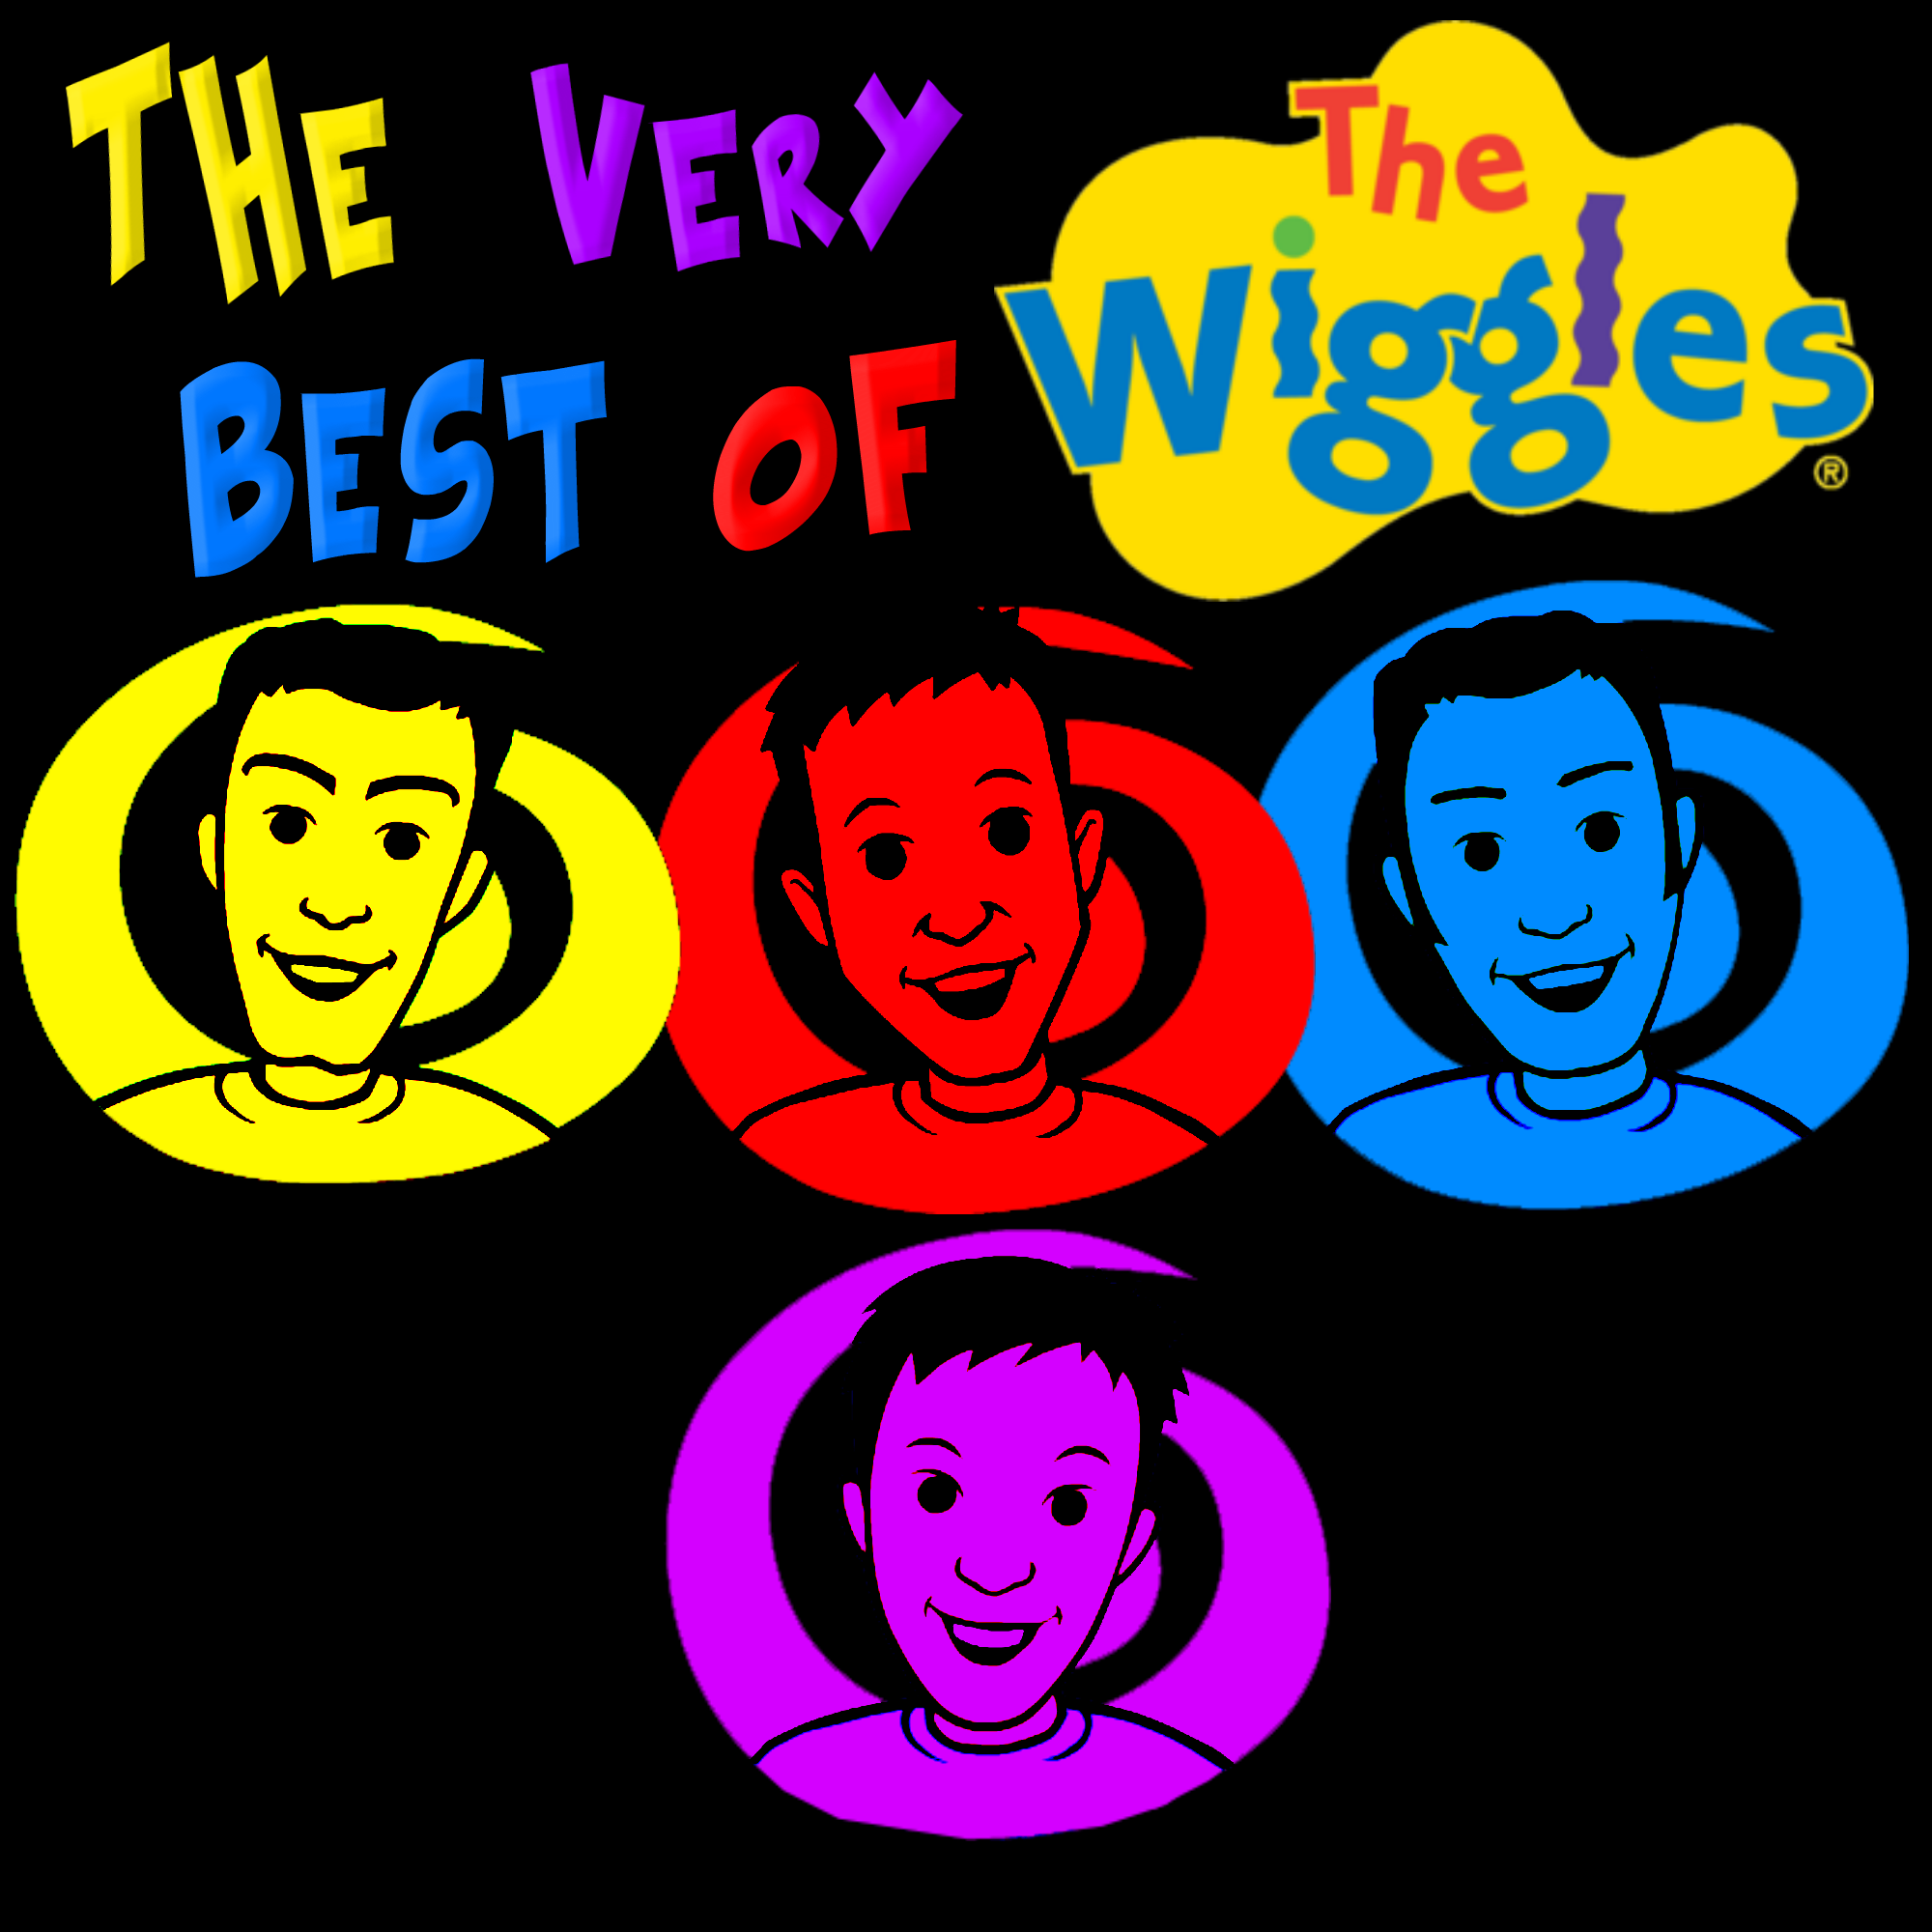 The Wiggles Are Releasing Two Best Of Albums, Covering their OG and Current  Eras